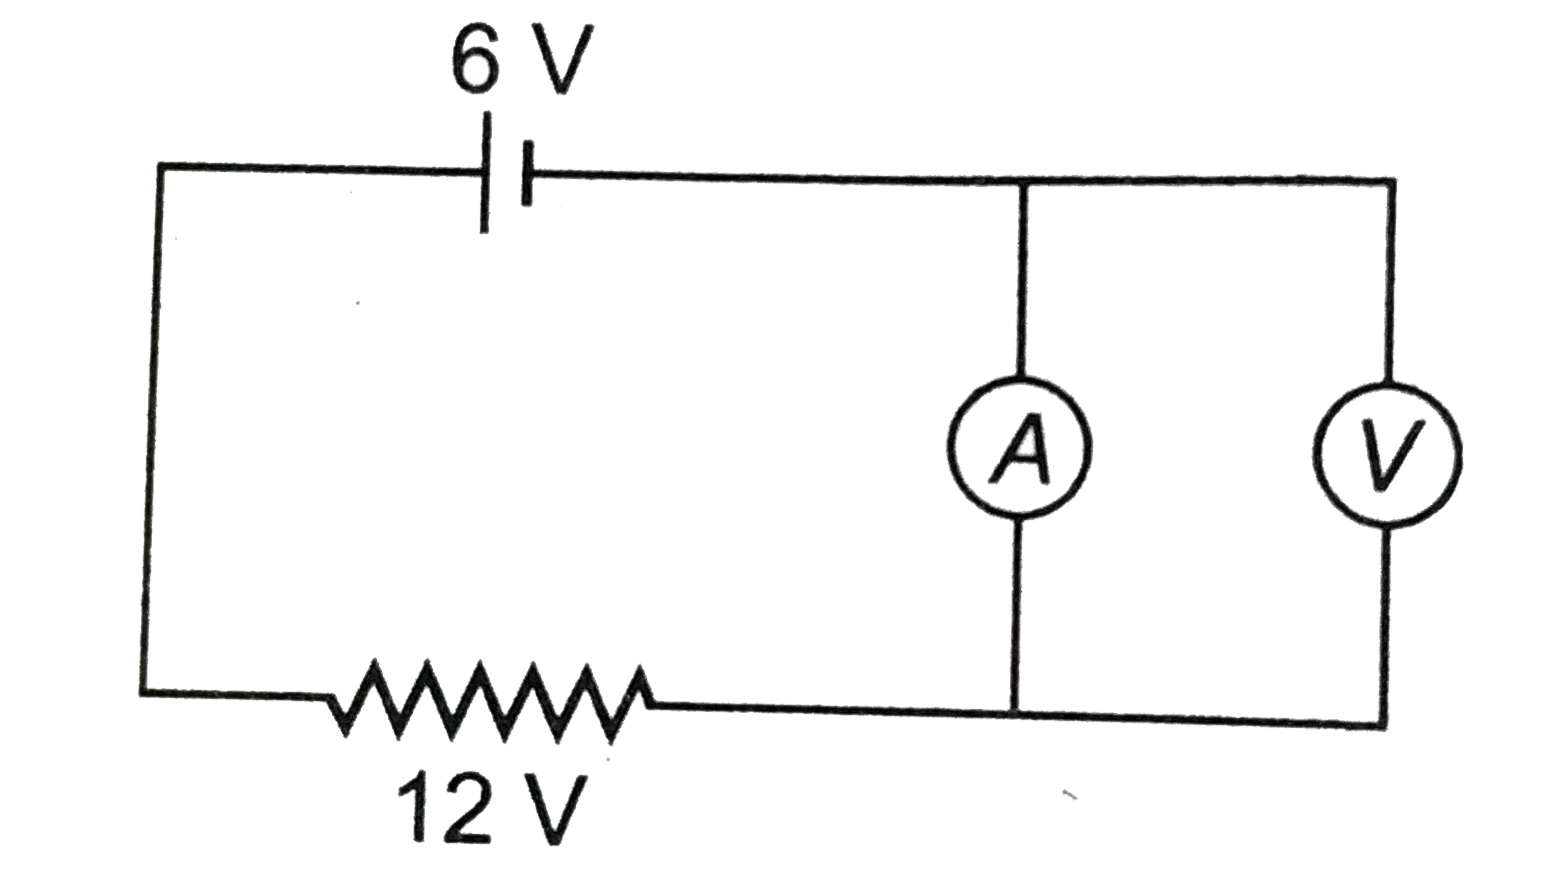 In the circuit given below, the ameter and voltmeter are ideal measuring devices. What is the reading of the voltmeter?